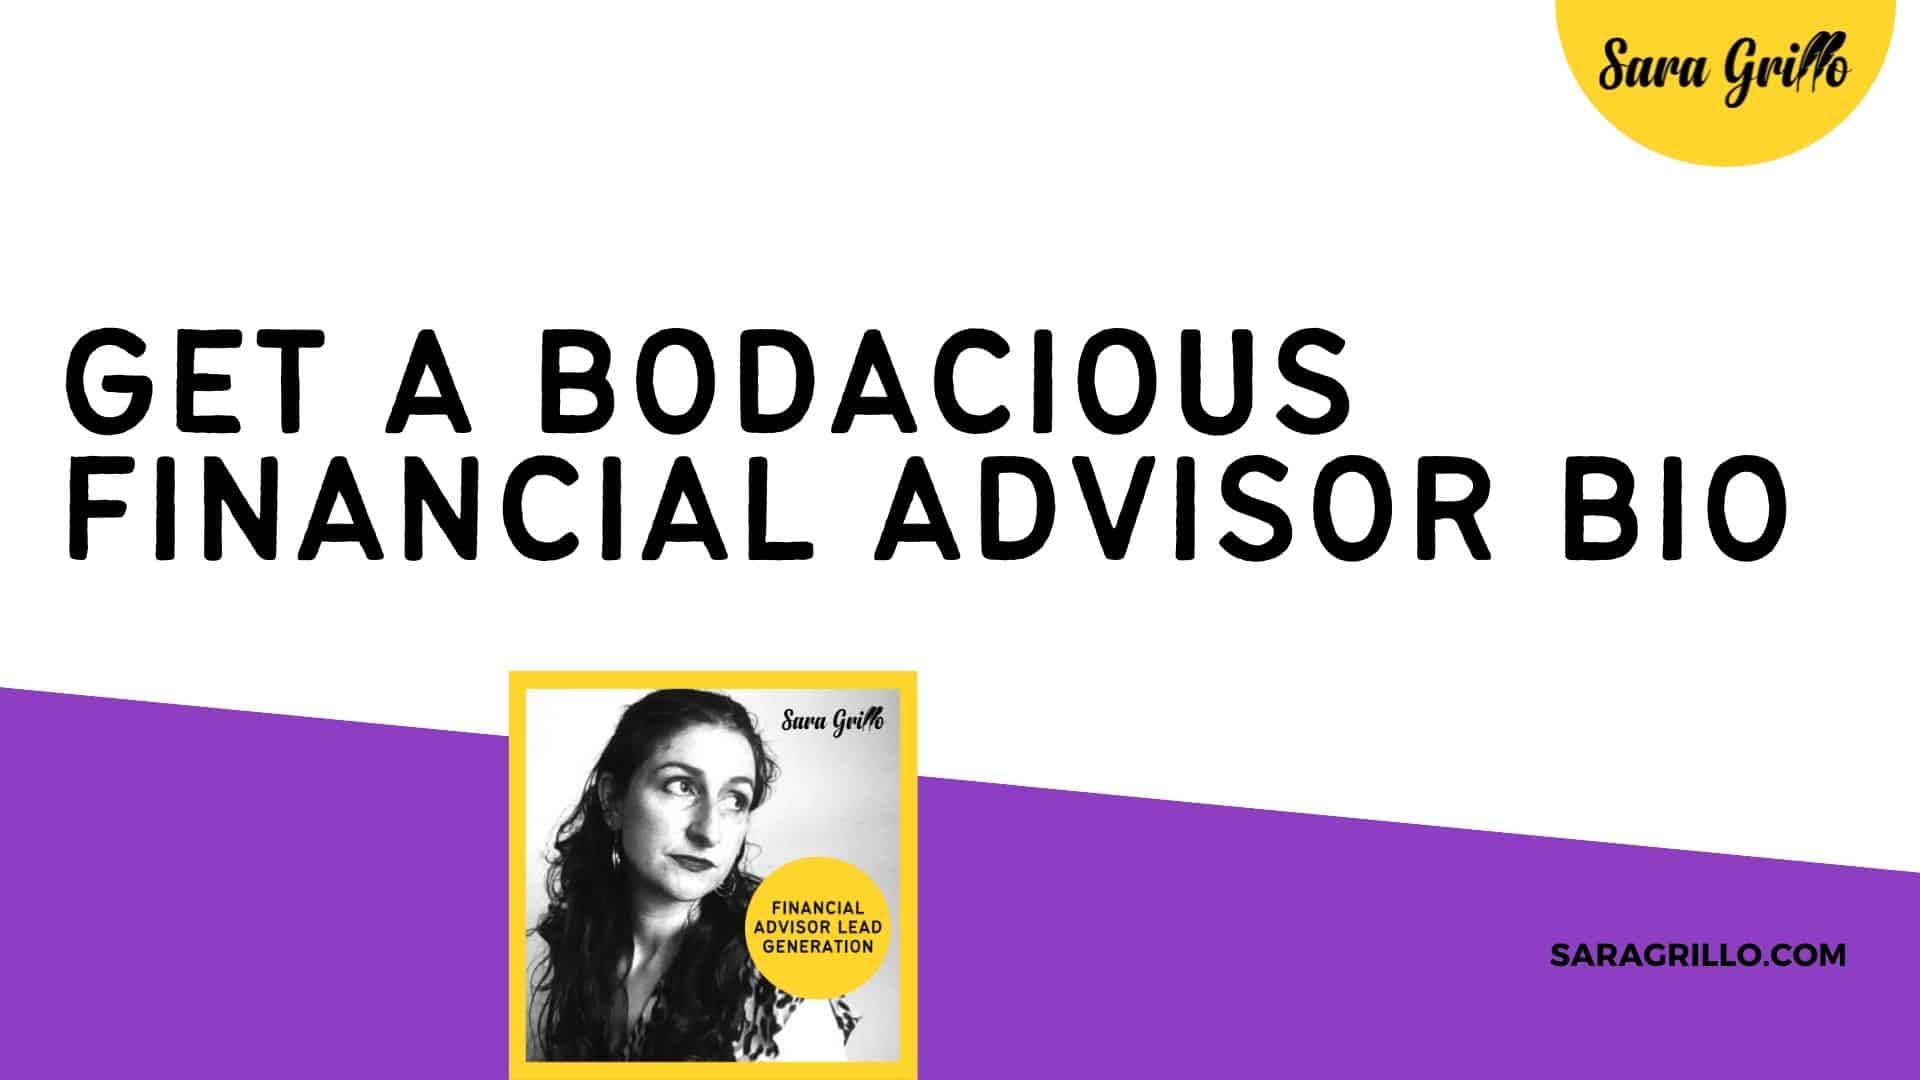 Here are some tips and examples for bodacious financial advisor bios.